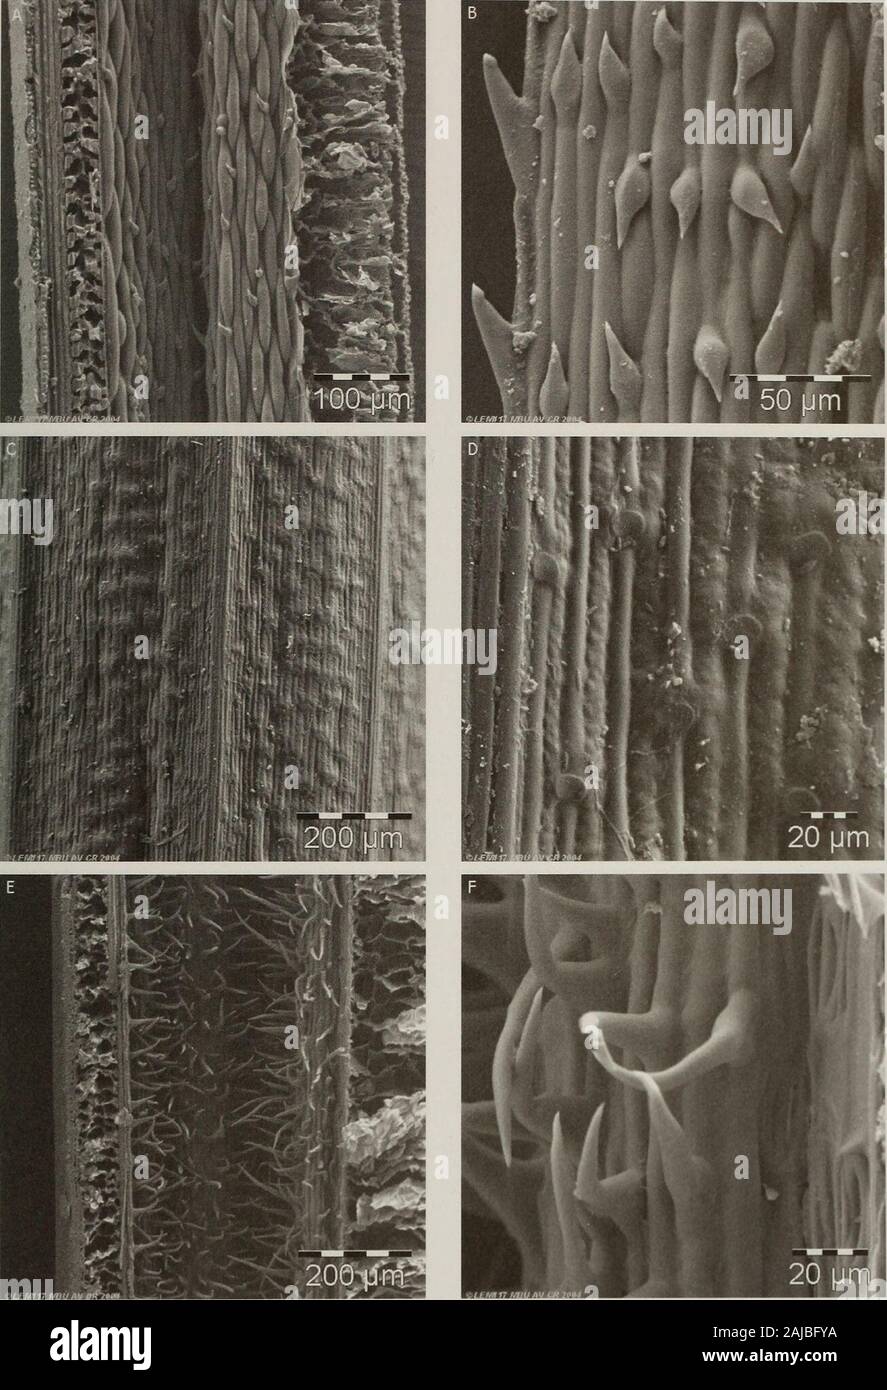 Contributions from the United States National Herbarium . 200 |jm Figure 89. Leaf blade surfaces. A & B. Festuca boyacensis. A. Abaxial epidermis, detail view of silica bodies. B. Adaxial epider-mis, detail view of stomata and macro-hairs and cell walls covered with wax. C & D. F carchiense. C. Abaxial epidermis, view oflong and short cells and sparse prickles. D. Adaxial epidermis with ribs covered with short macro-hairs. E & F. F. chimborazensissubsp. chimborazensis. E. Abaxial epidermis with small ribs. F. Abaxial epidermis, detail view of silica bodies. A & B, Stancik2166 (PRC); C & D, Lae Stock Photo